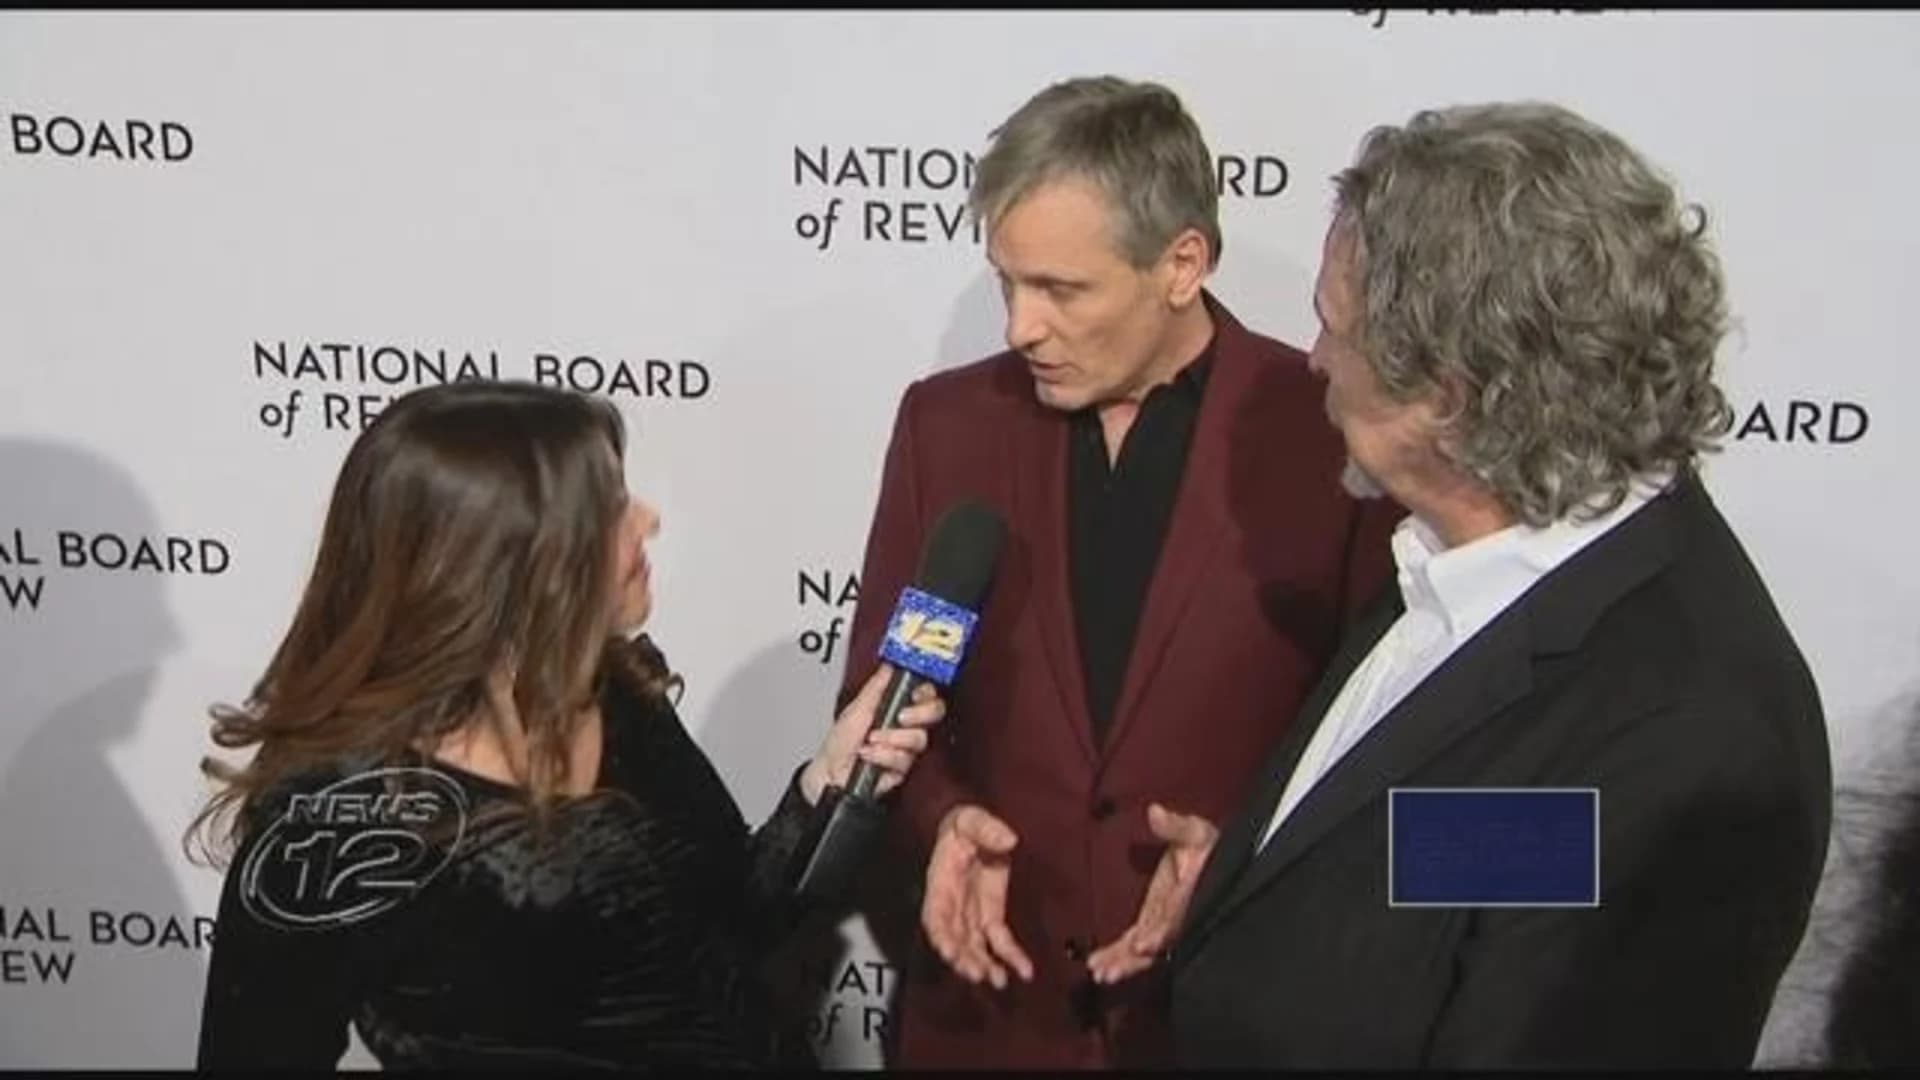 Stars hit the red carpet for National Board of Review Awards